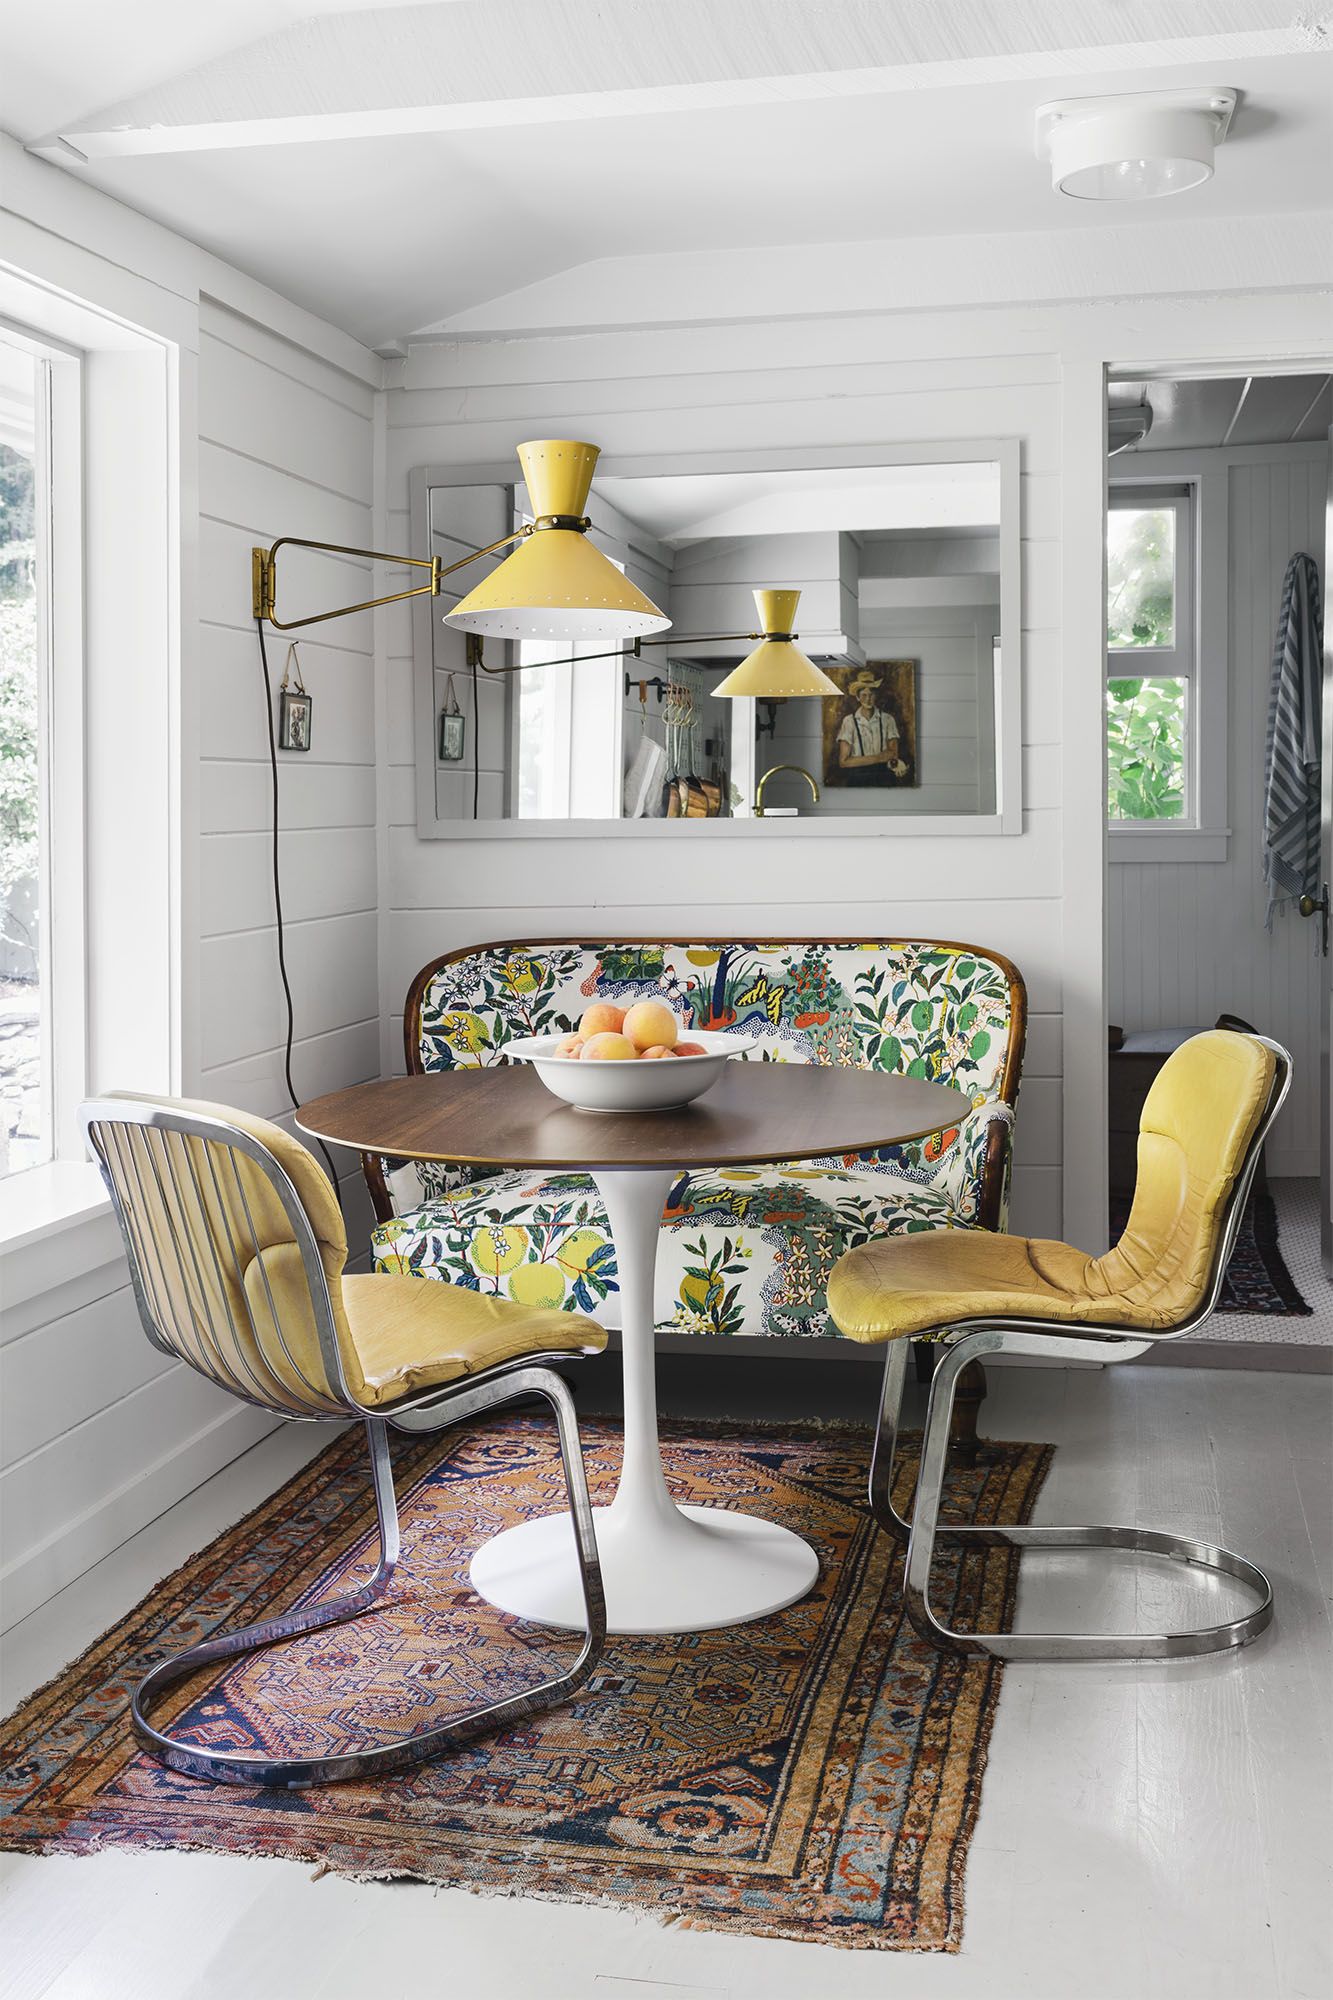 https://hips.hearstapps.com/hmg-prod/images/breakfast-nook-ideas-floral-bench-yellow-chairs-1643130714.jpg